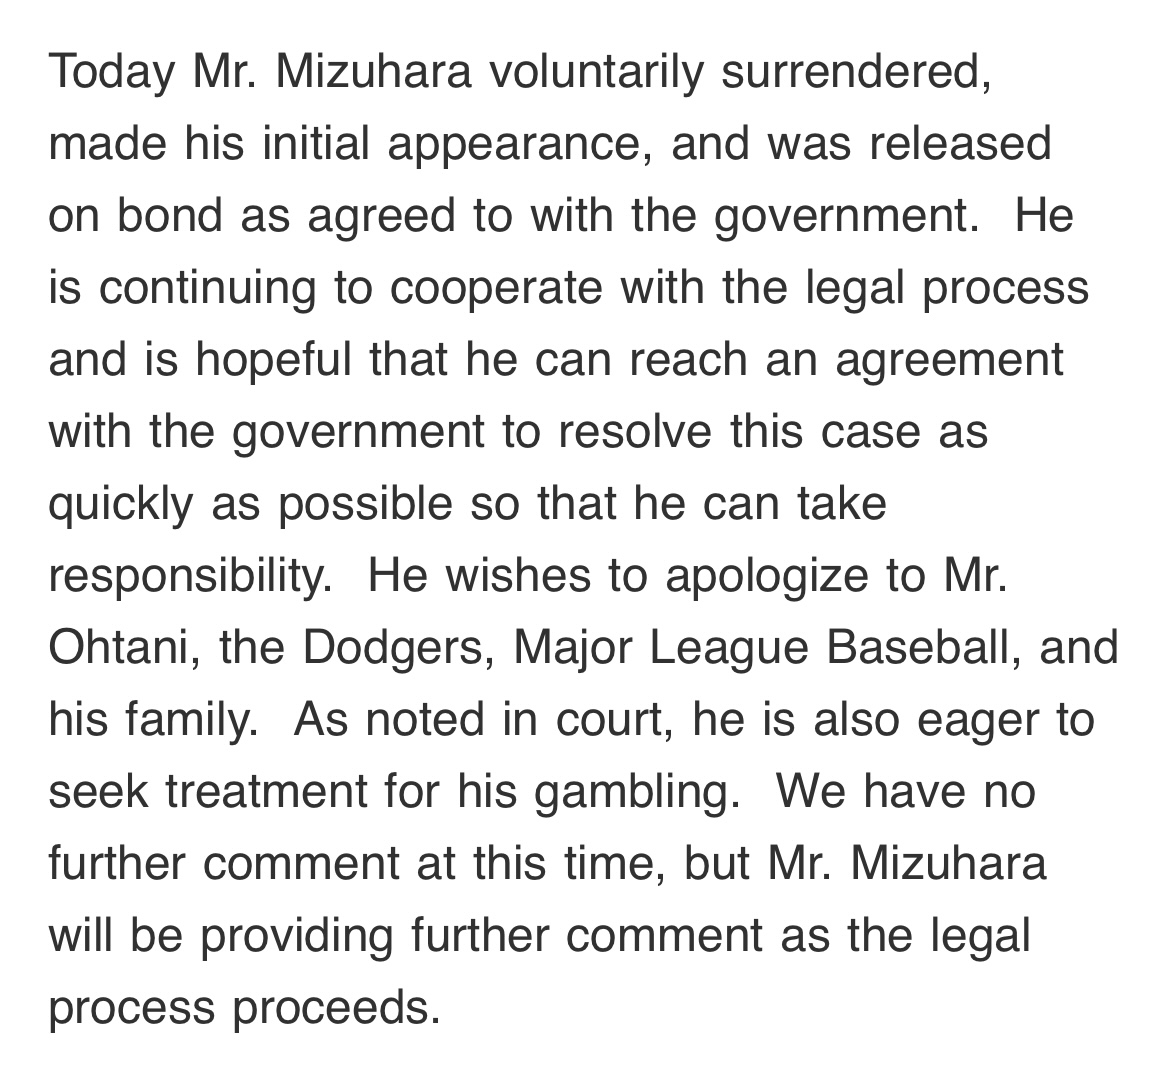 The attorney for Ippei Mizuhara issued a brief statement this afternoon on behalf of the ex-interpreter for Dodgers superstar Shohei Ohtani. Mizuhara made his first court appearance today after being charged with bank fraud for allegedly stealing $16 million from Ohtani.